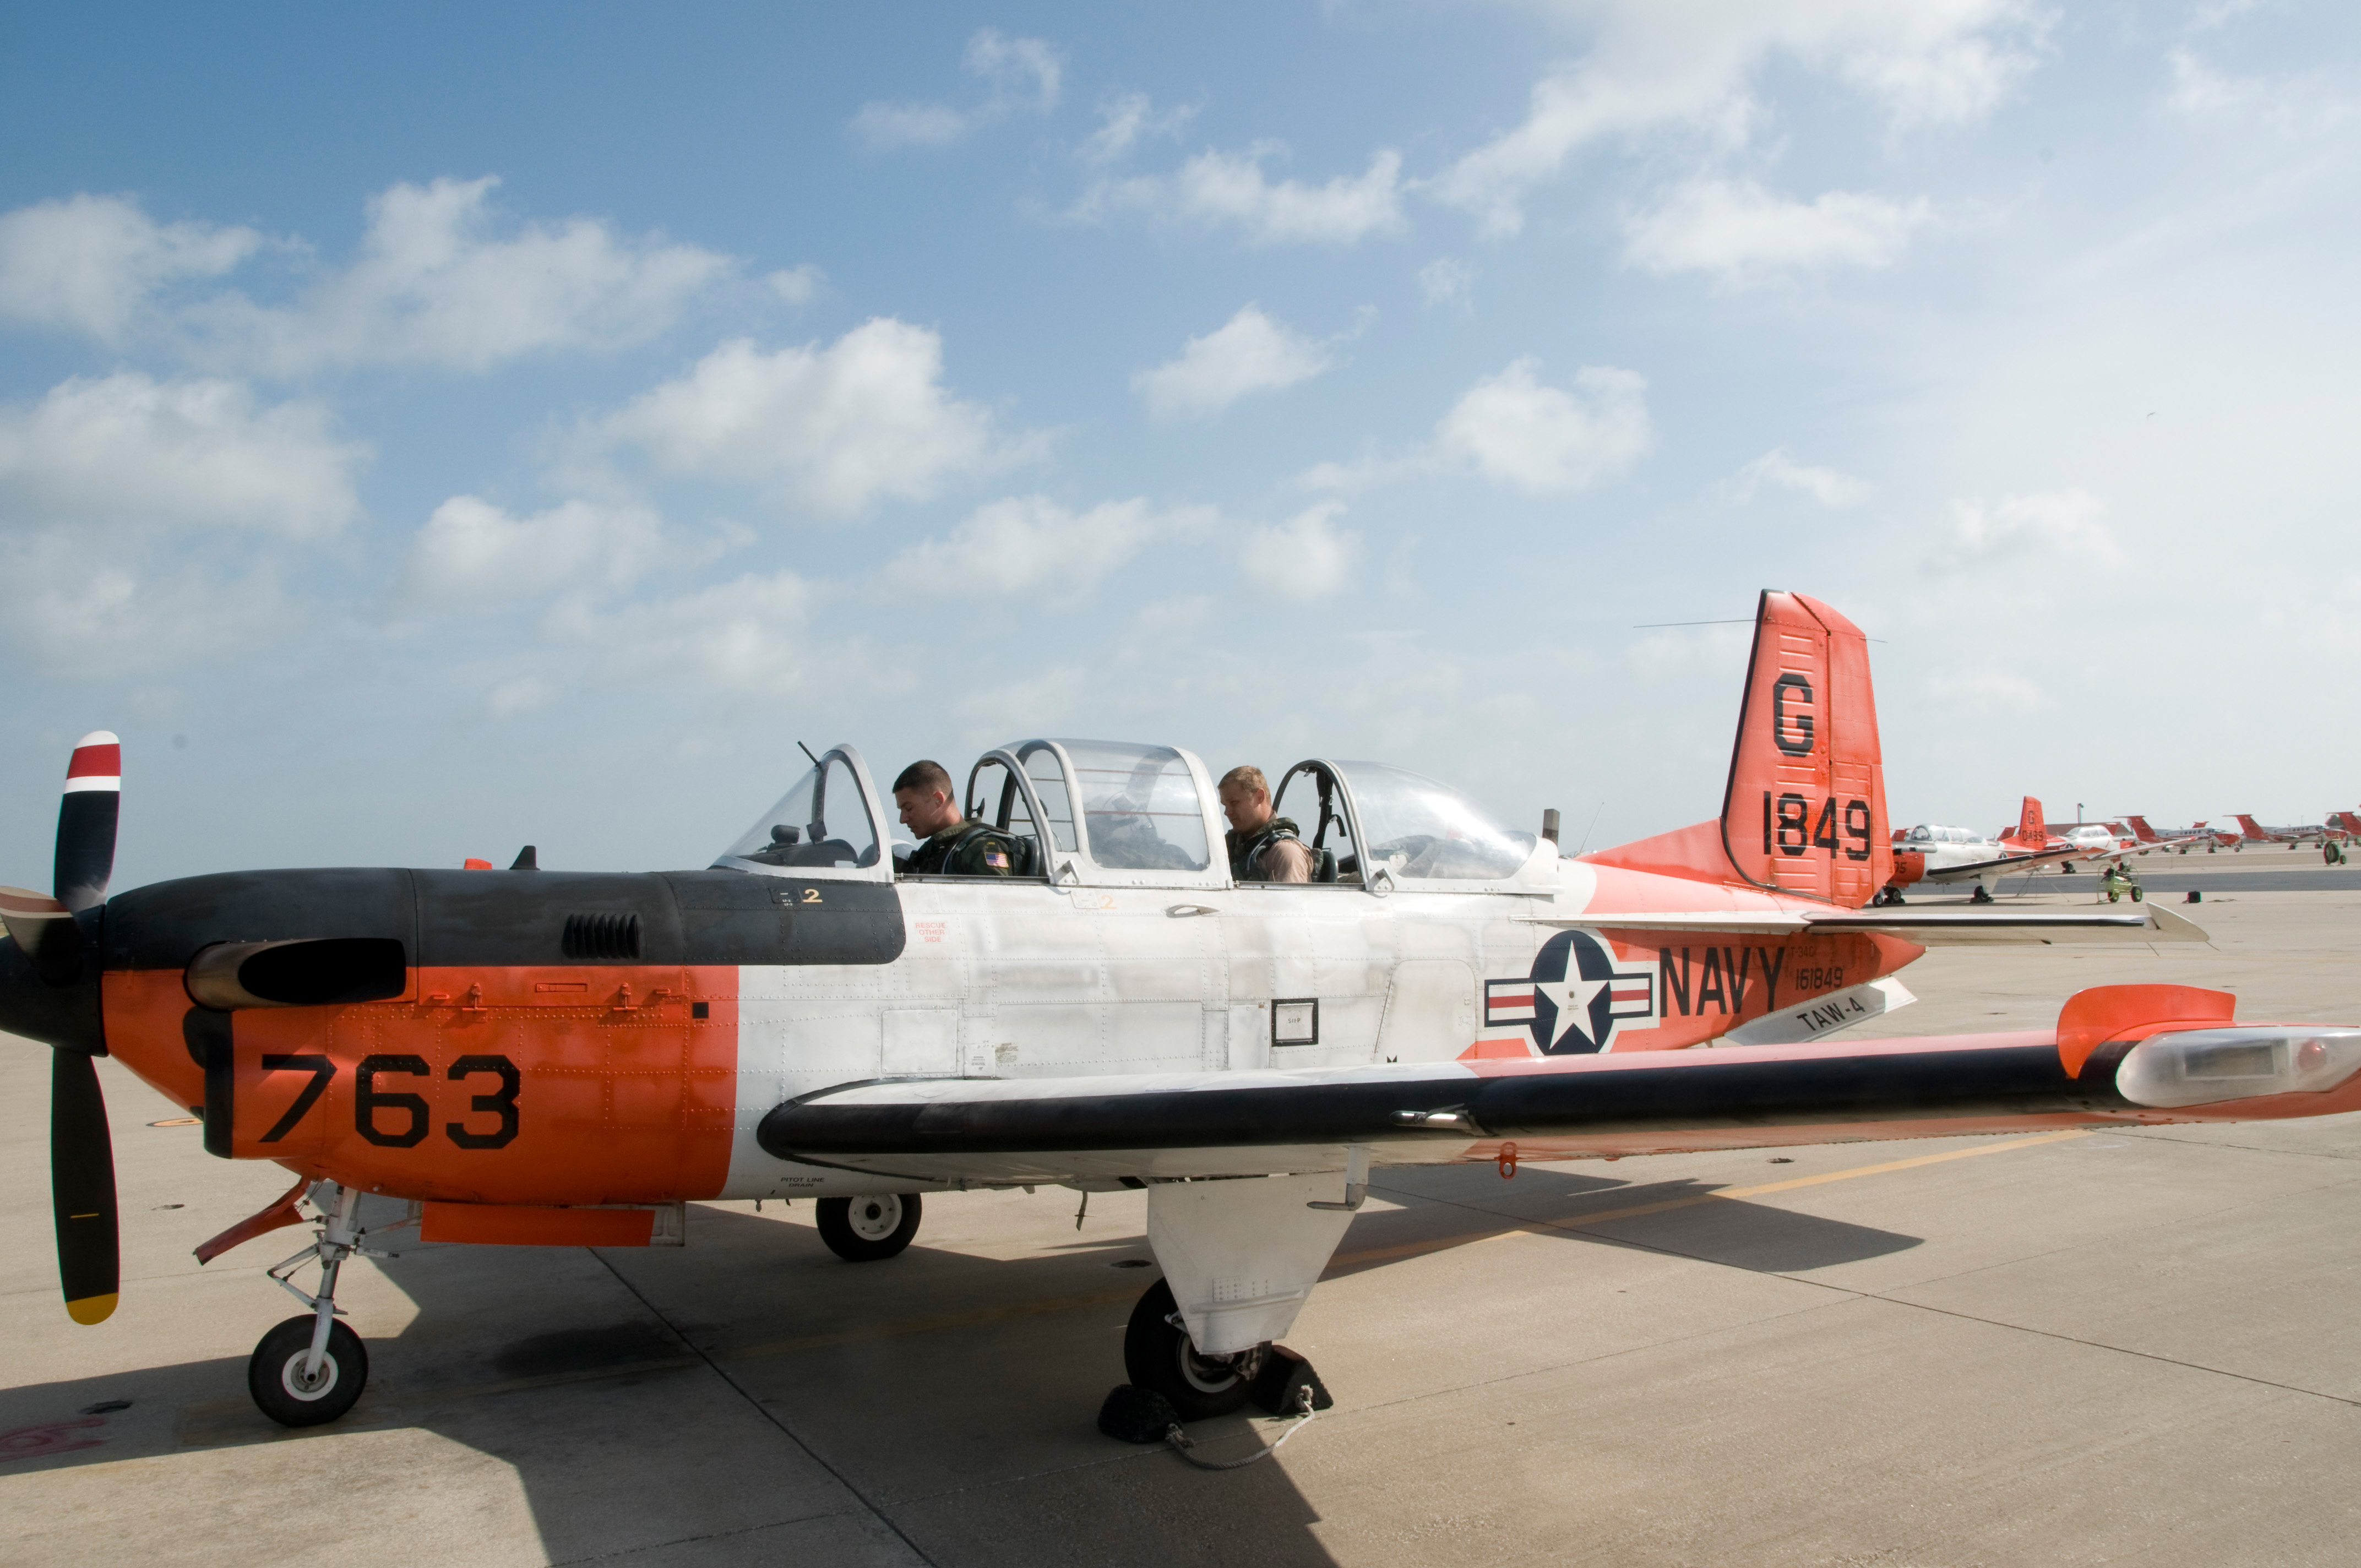 Navy Training Aircraft Crashes in Gulf of Mexico - USNI News